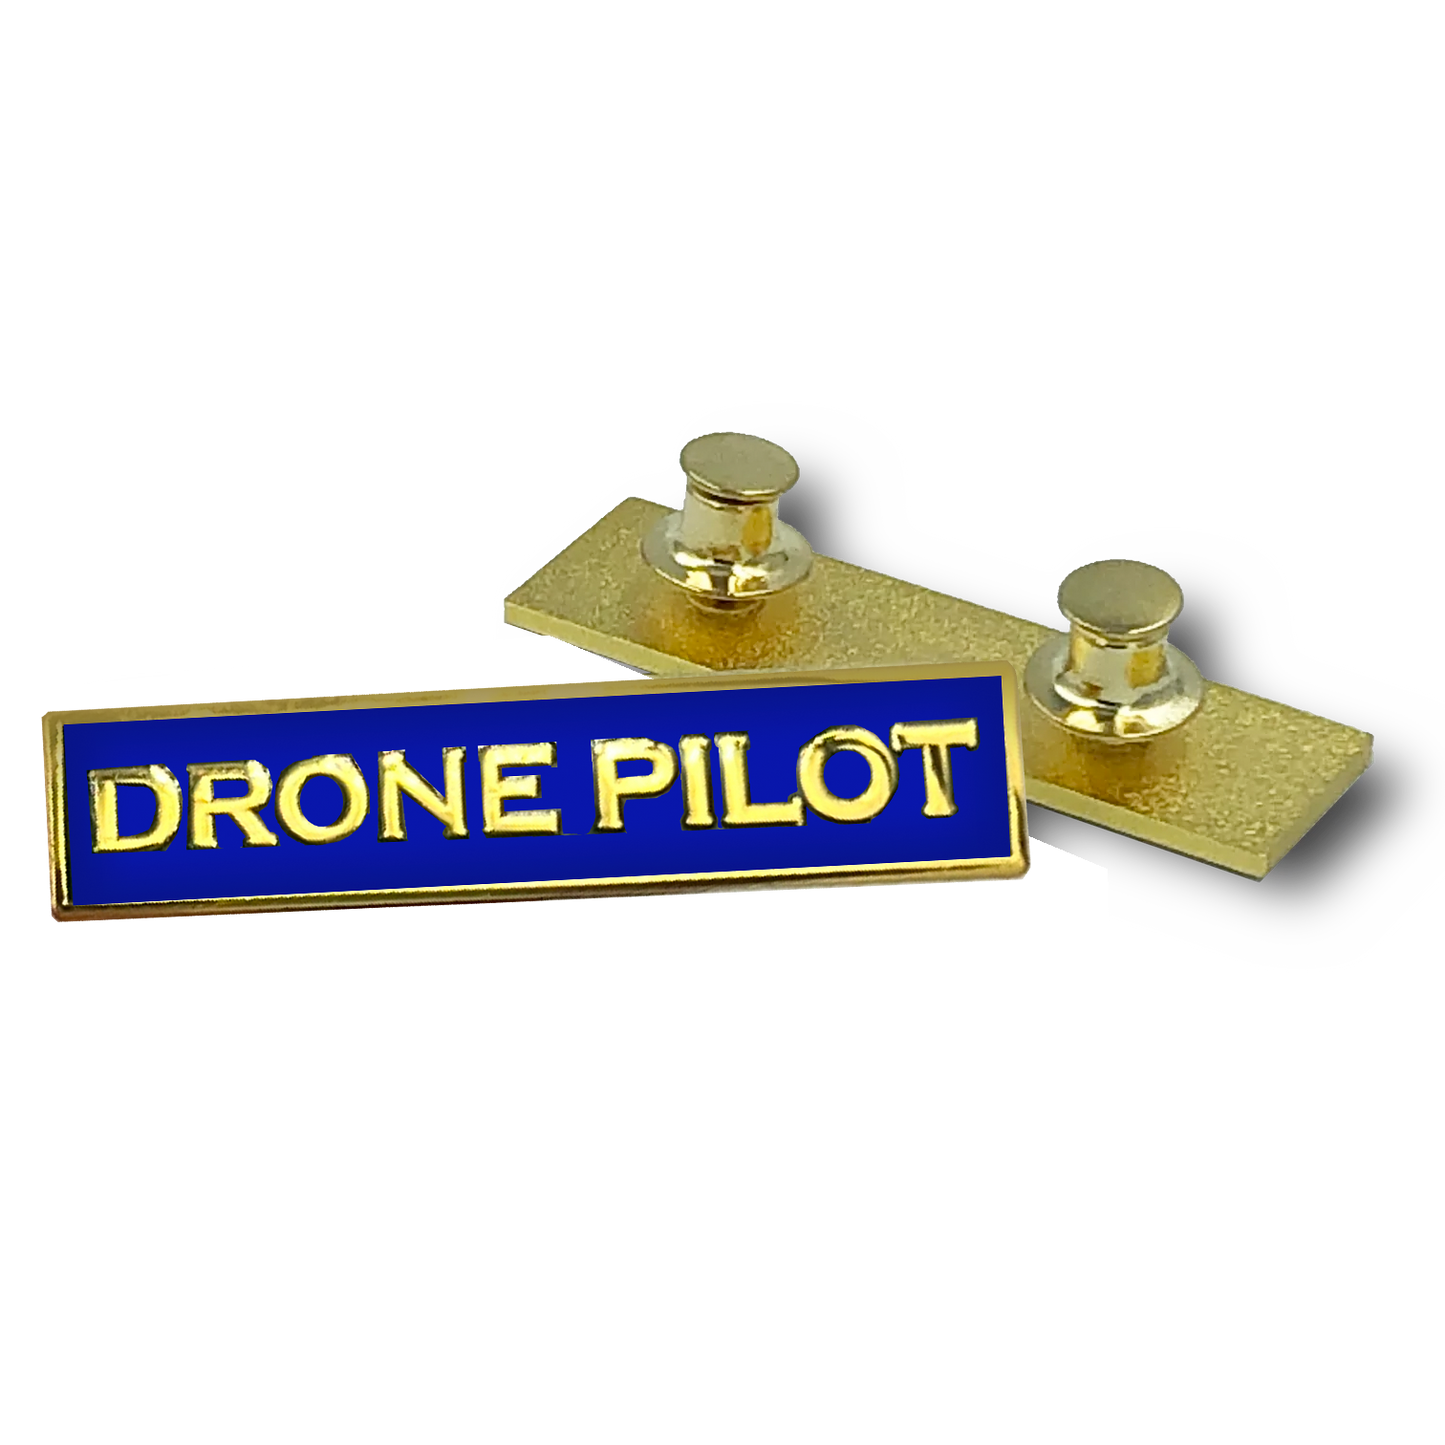 PBX-003-H DRONE PILOT Blue Commendation Bar Pin Police Government Realtor Commercial FAA